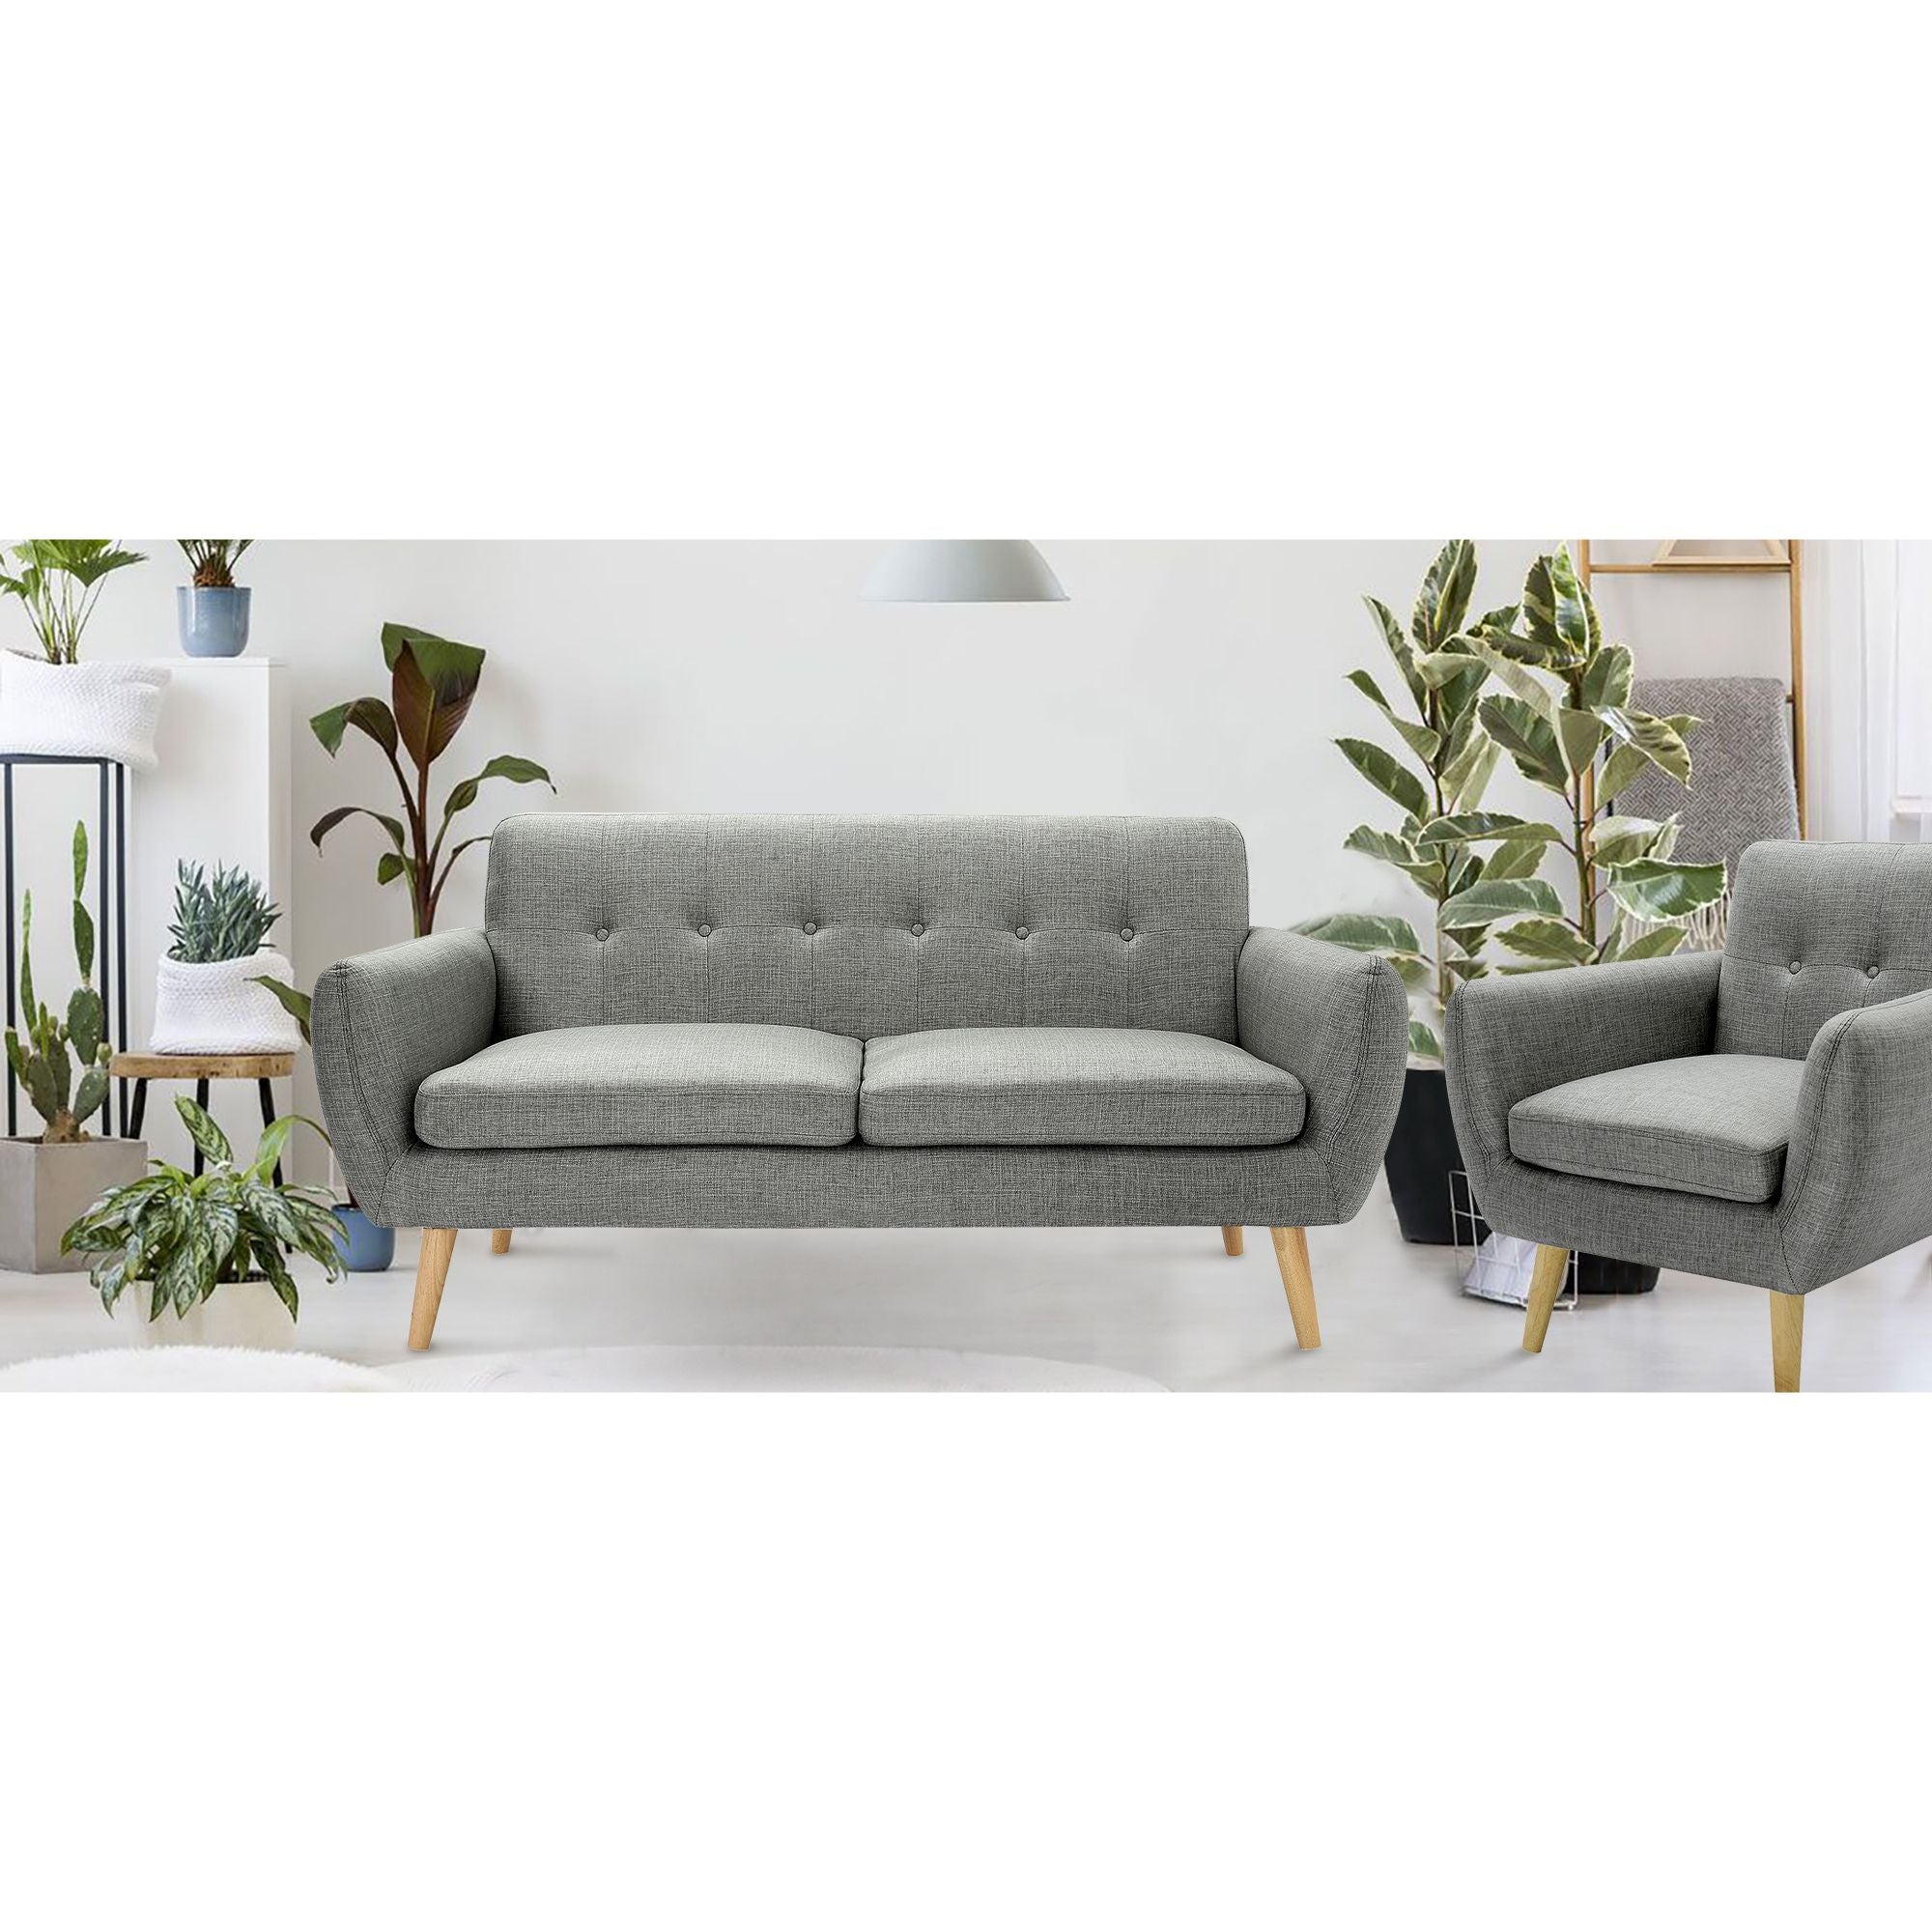 Dane 3 + 1 + 1 Seater Fabric Upholstered Sofa Armchair Lounge Couch - Mid Grey.